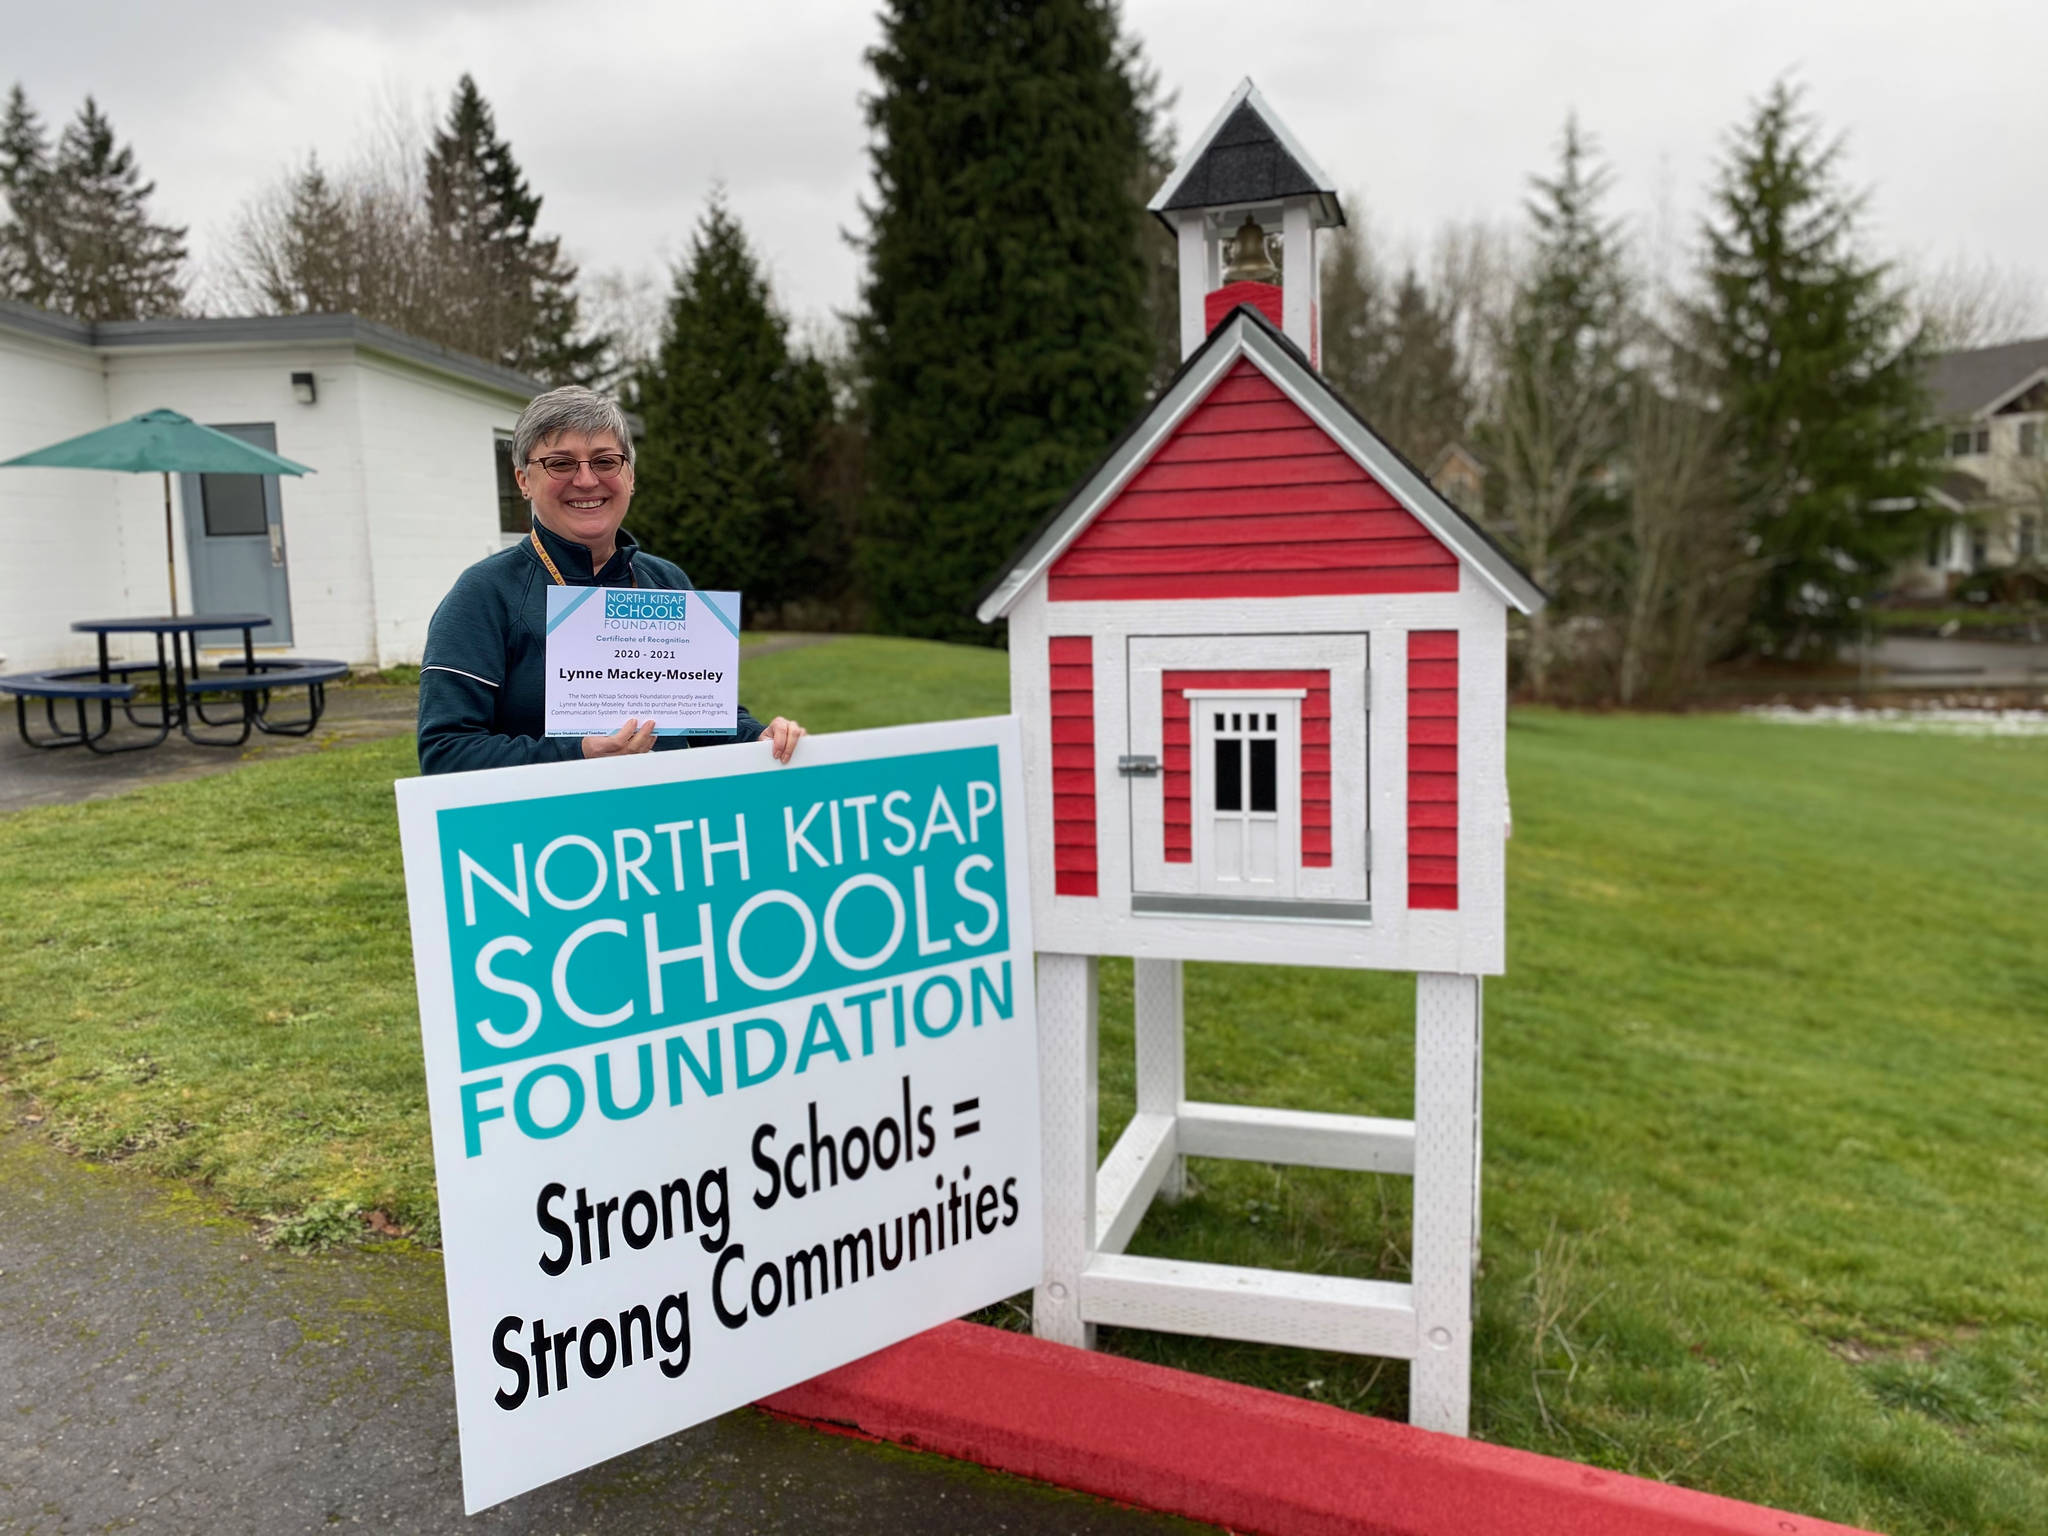 Lynne Mackey-Moseley was one of the recipients of a grant from the North Kitsap Schools Foundation. (Courtesy photo).